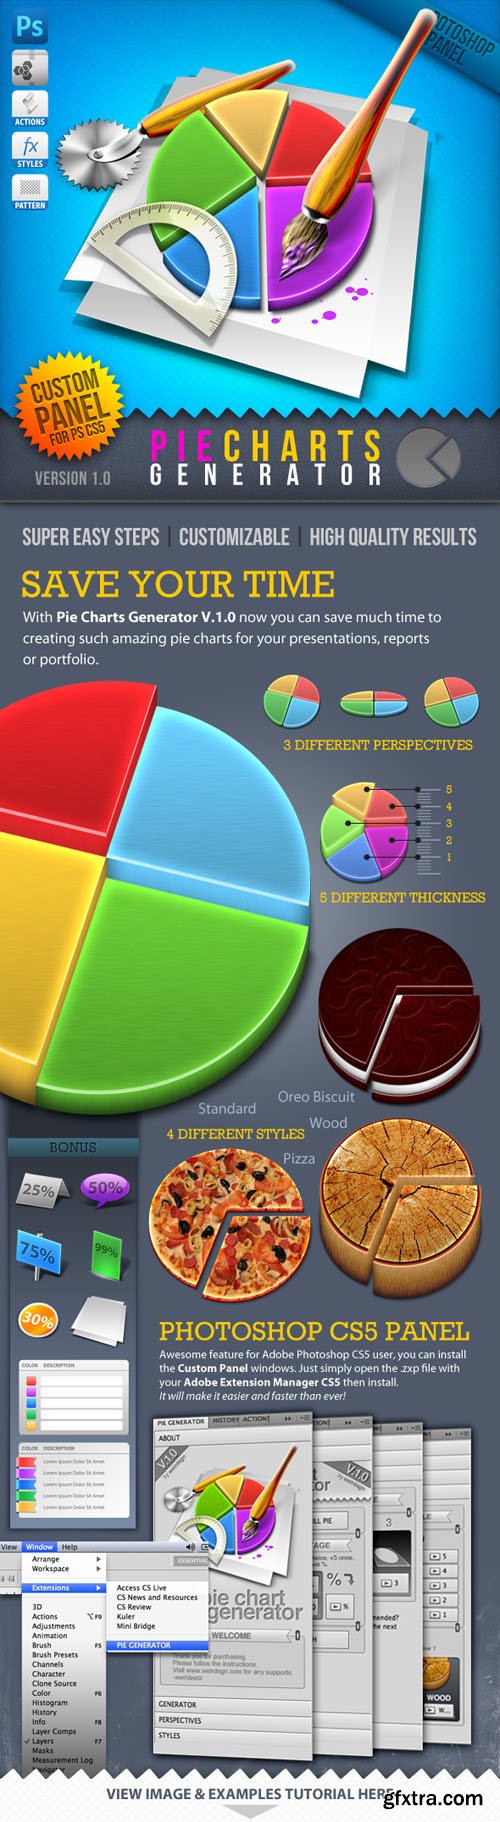 Graphicriver Infographic Tool Series: 3D Pie Charts Generator 888921